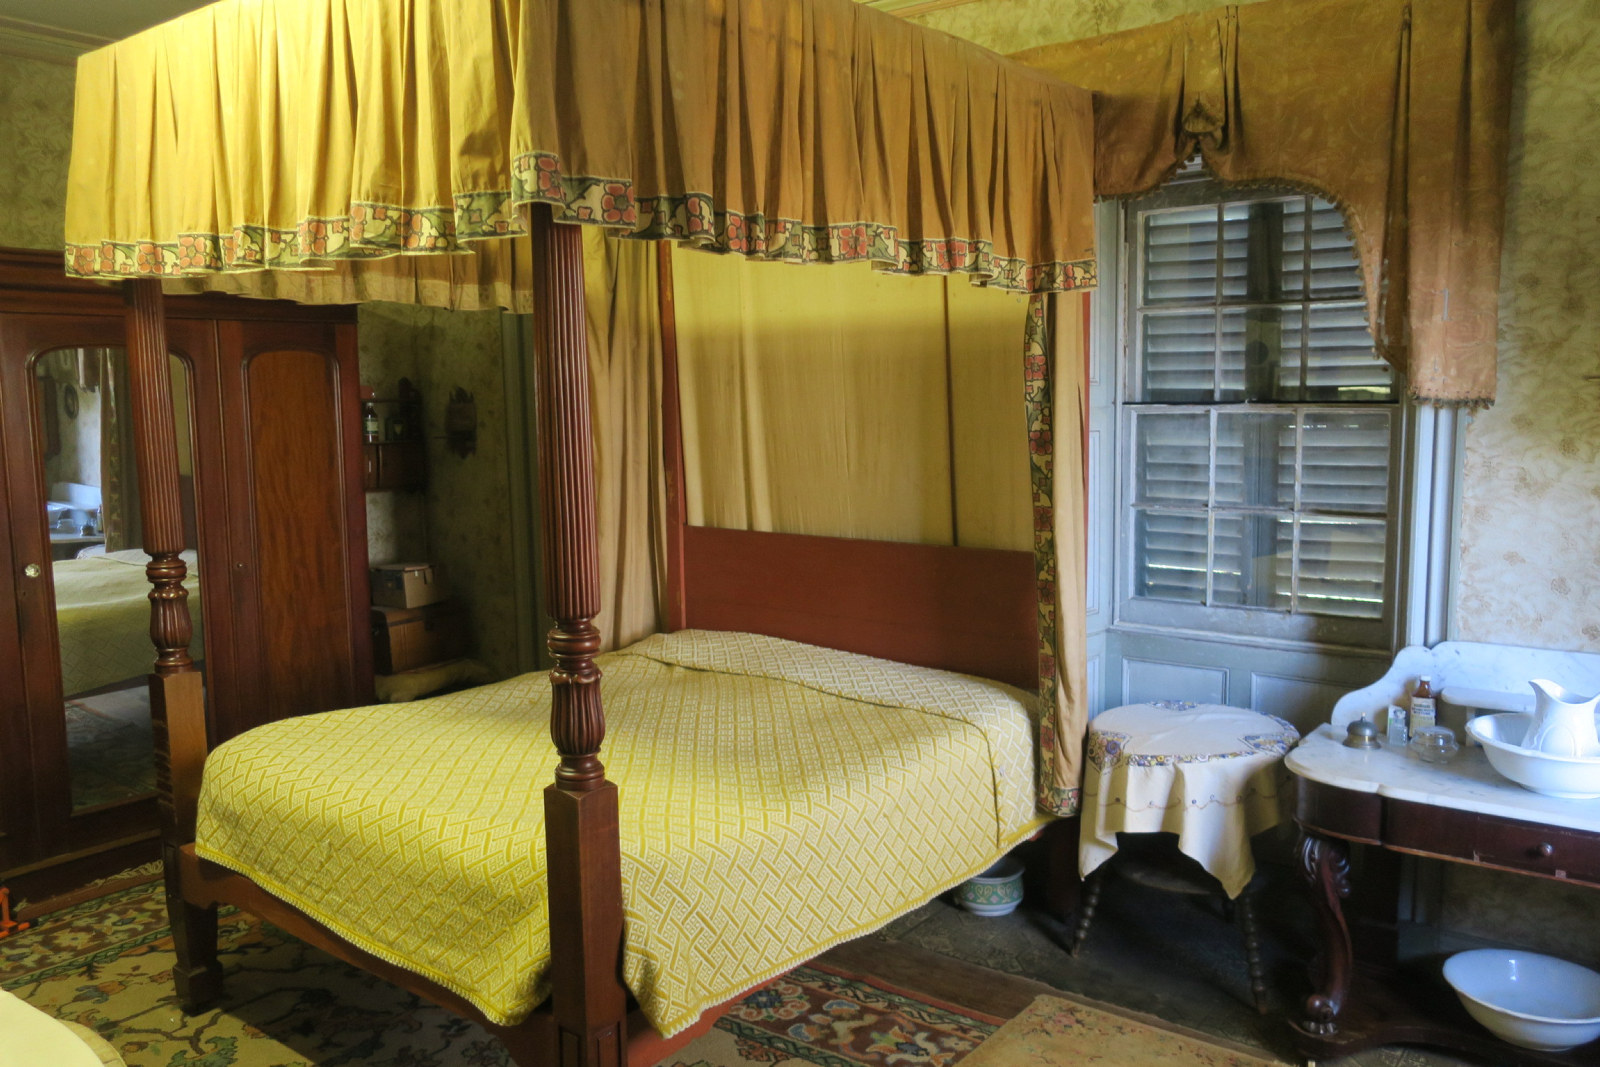 Interior view of bedroom, showing bedcovers being removed for cleaning.